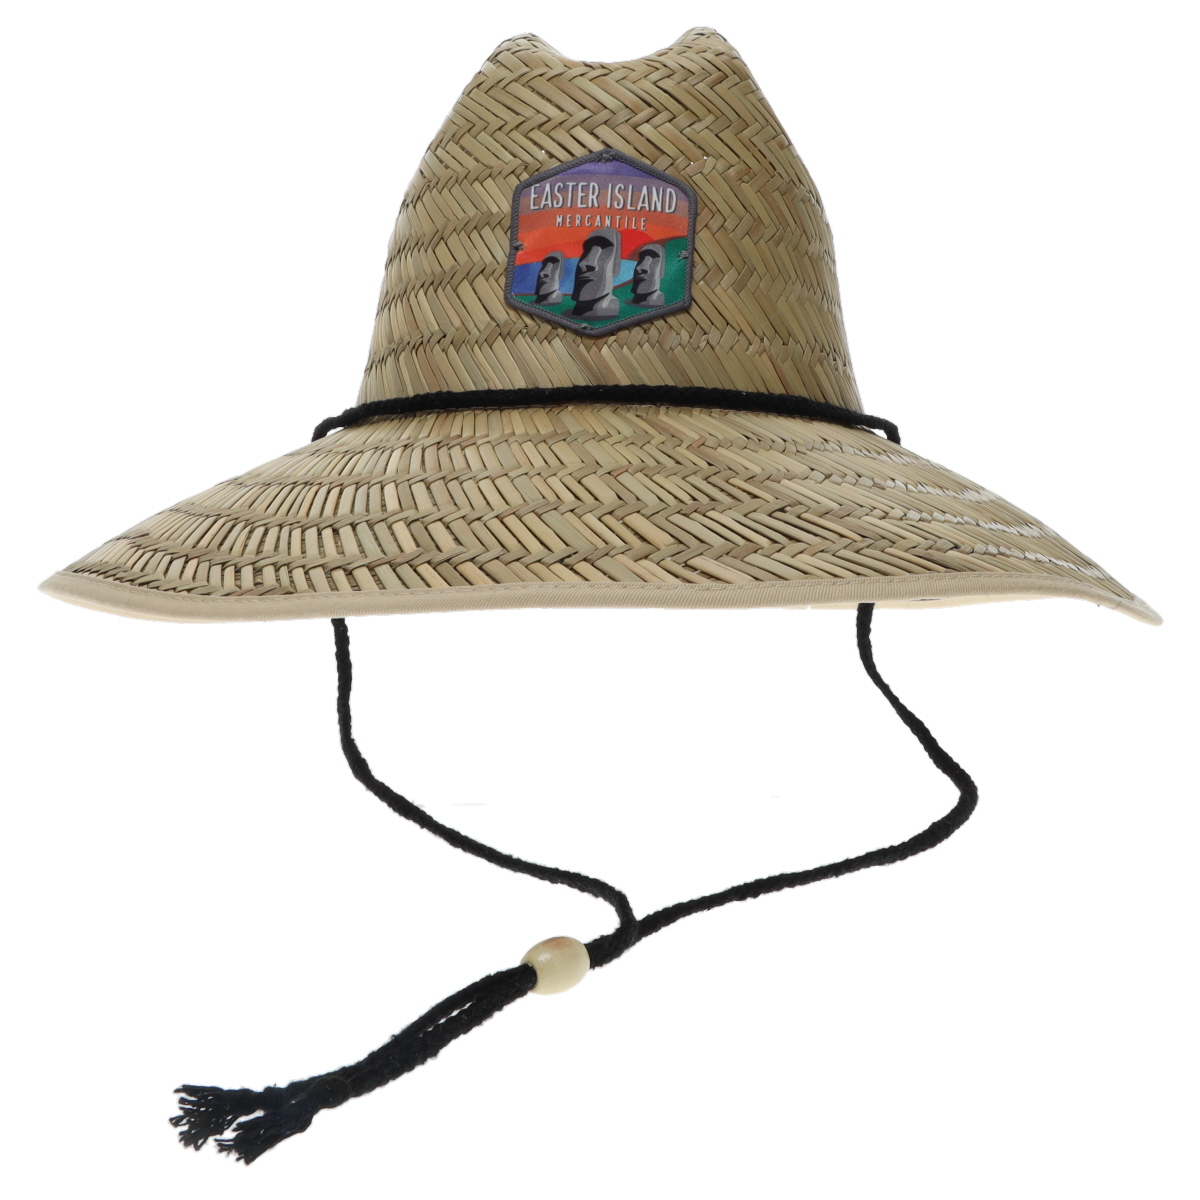 Easter Island Mercantile HBS4BLK Straw Patch Hat with Black Floral Brim Straw Sun Hat for Men and Women Beach Hat Sunblock